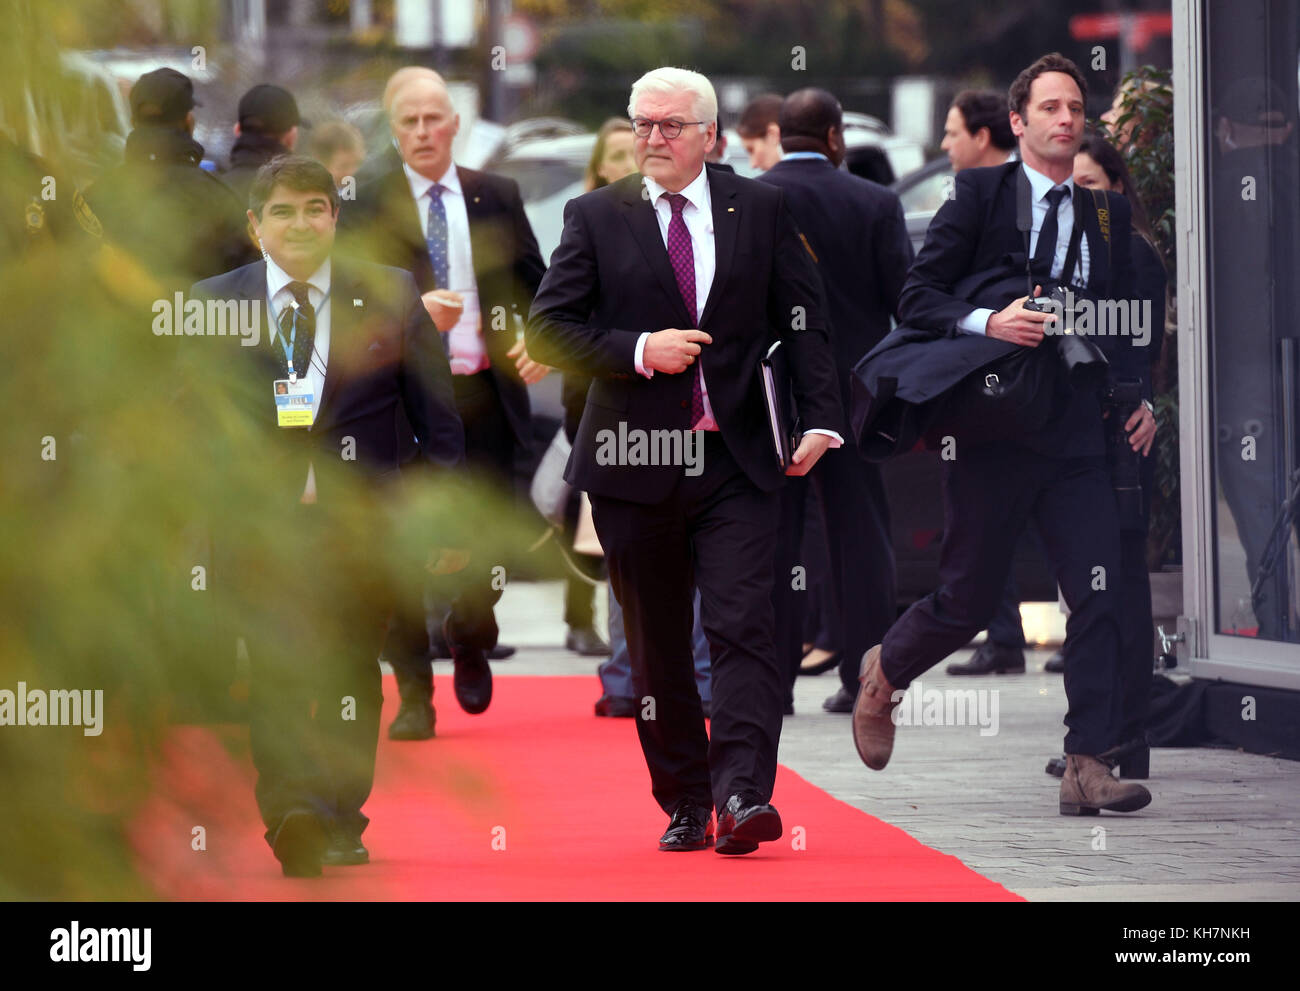 Bonn, Germany . 15th Nov, 2017. German President Frank-Walter Steinmeier arriving to the World Climate Conference in Bonn, Germany, 15 November 2017. The COP23 World Climate Conference takes place in Bonn between 06 and 17 November. Credit: dpa picture alliance/Alamy Live News Stock Photo